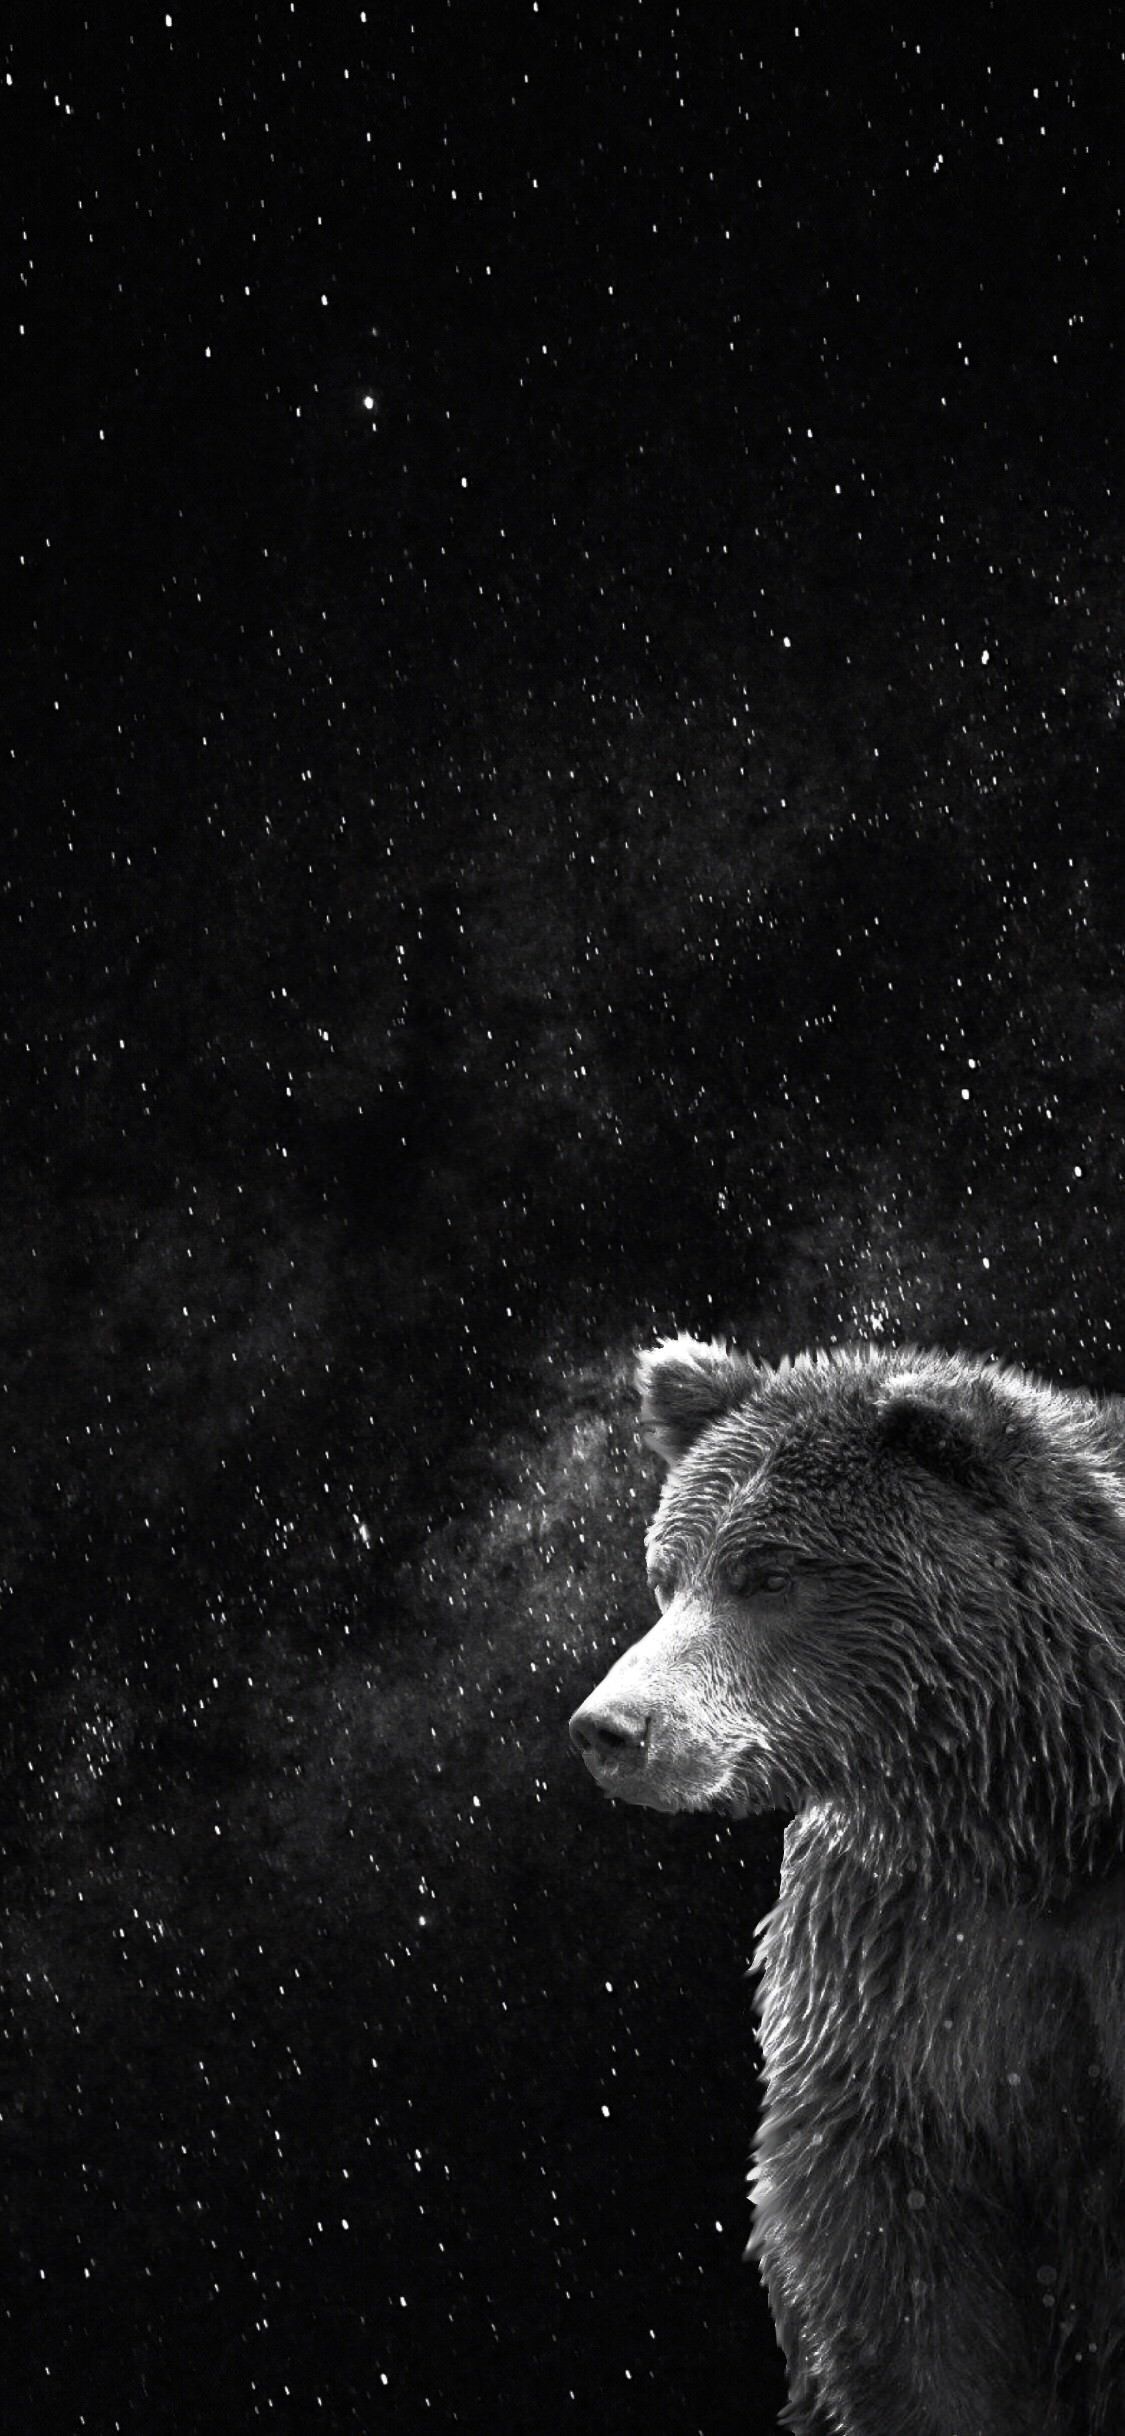 Bear in front of night sky